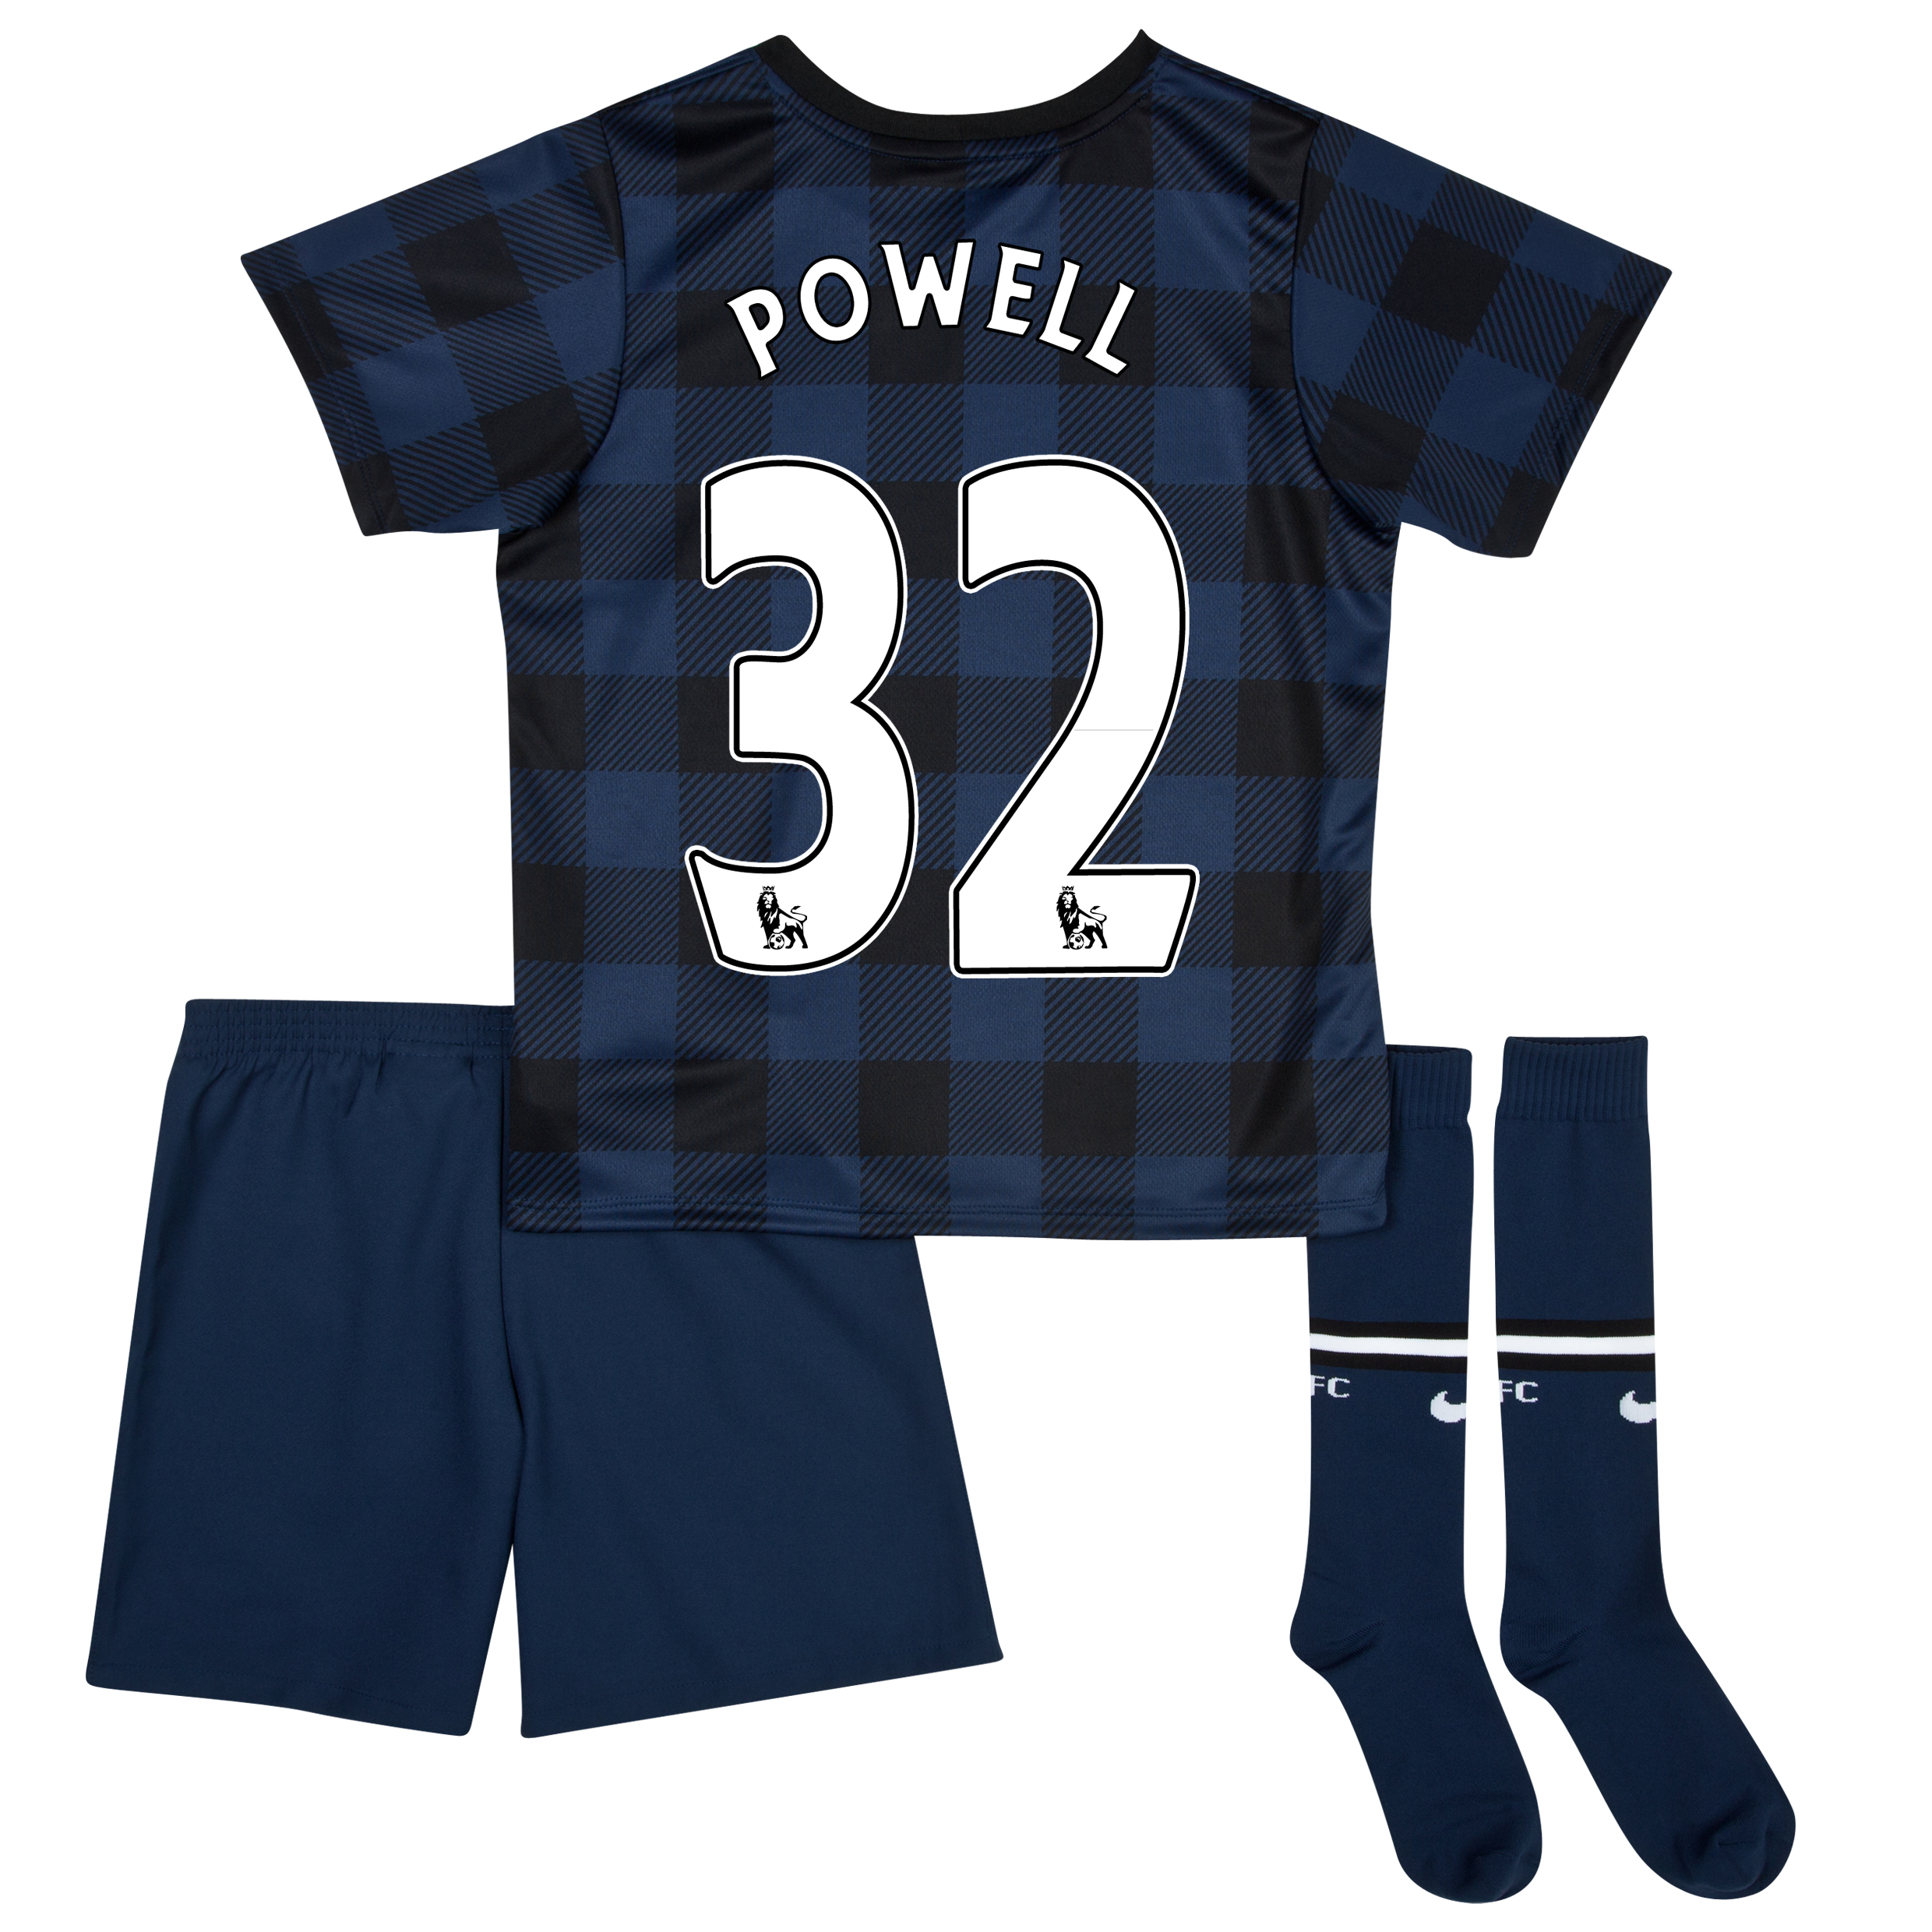 Manchester United Away Kit 2013/14 - Little Boys with Powell 32 printing